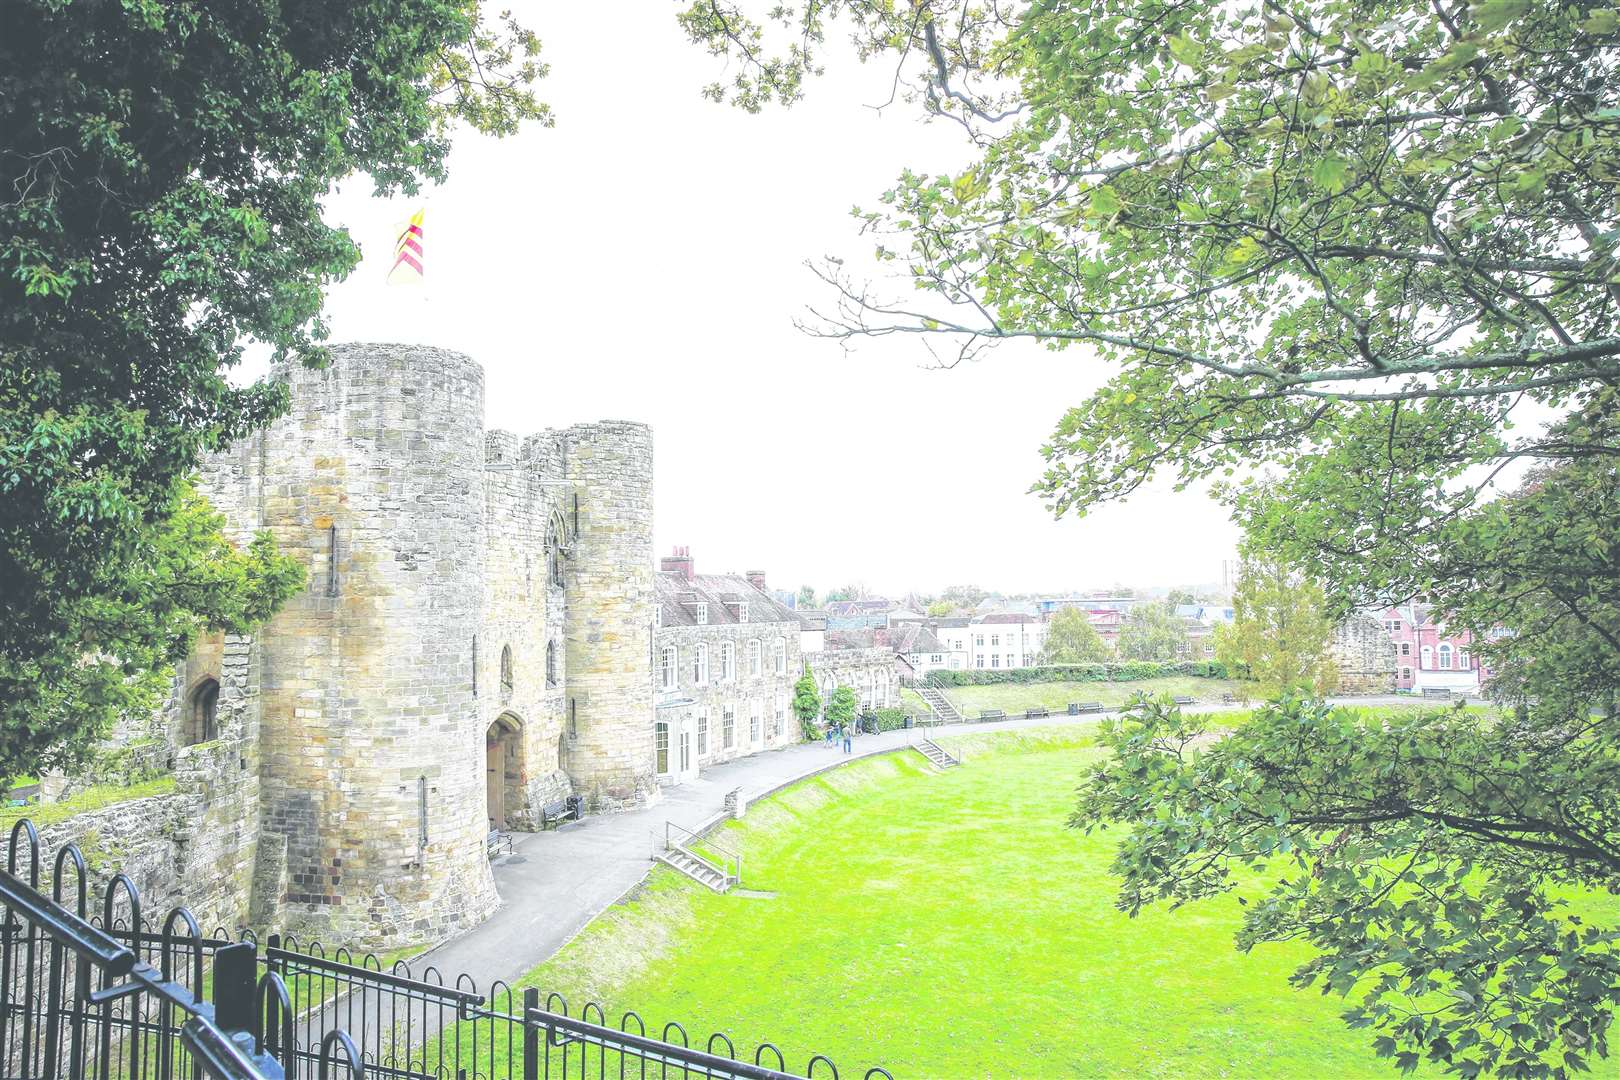 Service personnel can visit Tonbridge Castle for free on Saturday. Picture: Google street view